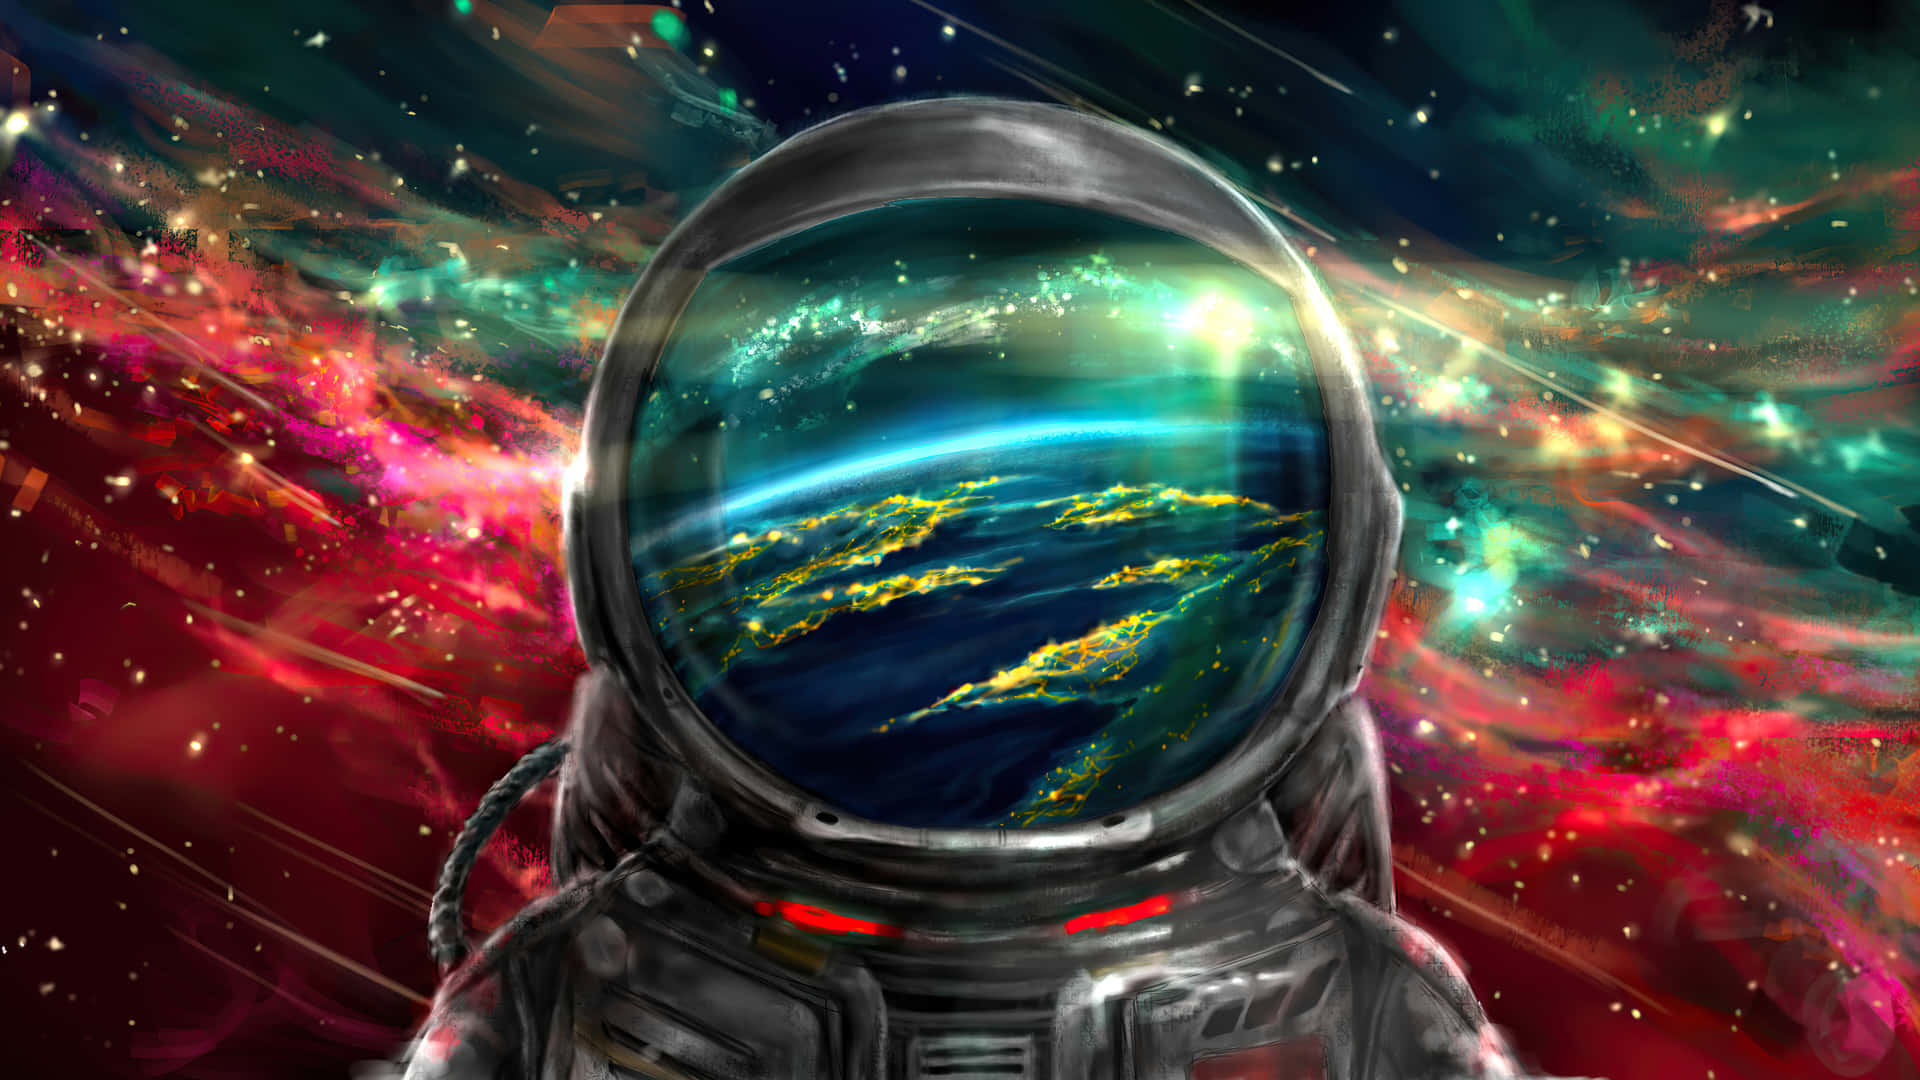 Download Explore the depths of space in mesmerizing 3D Wallpaper ...